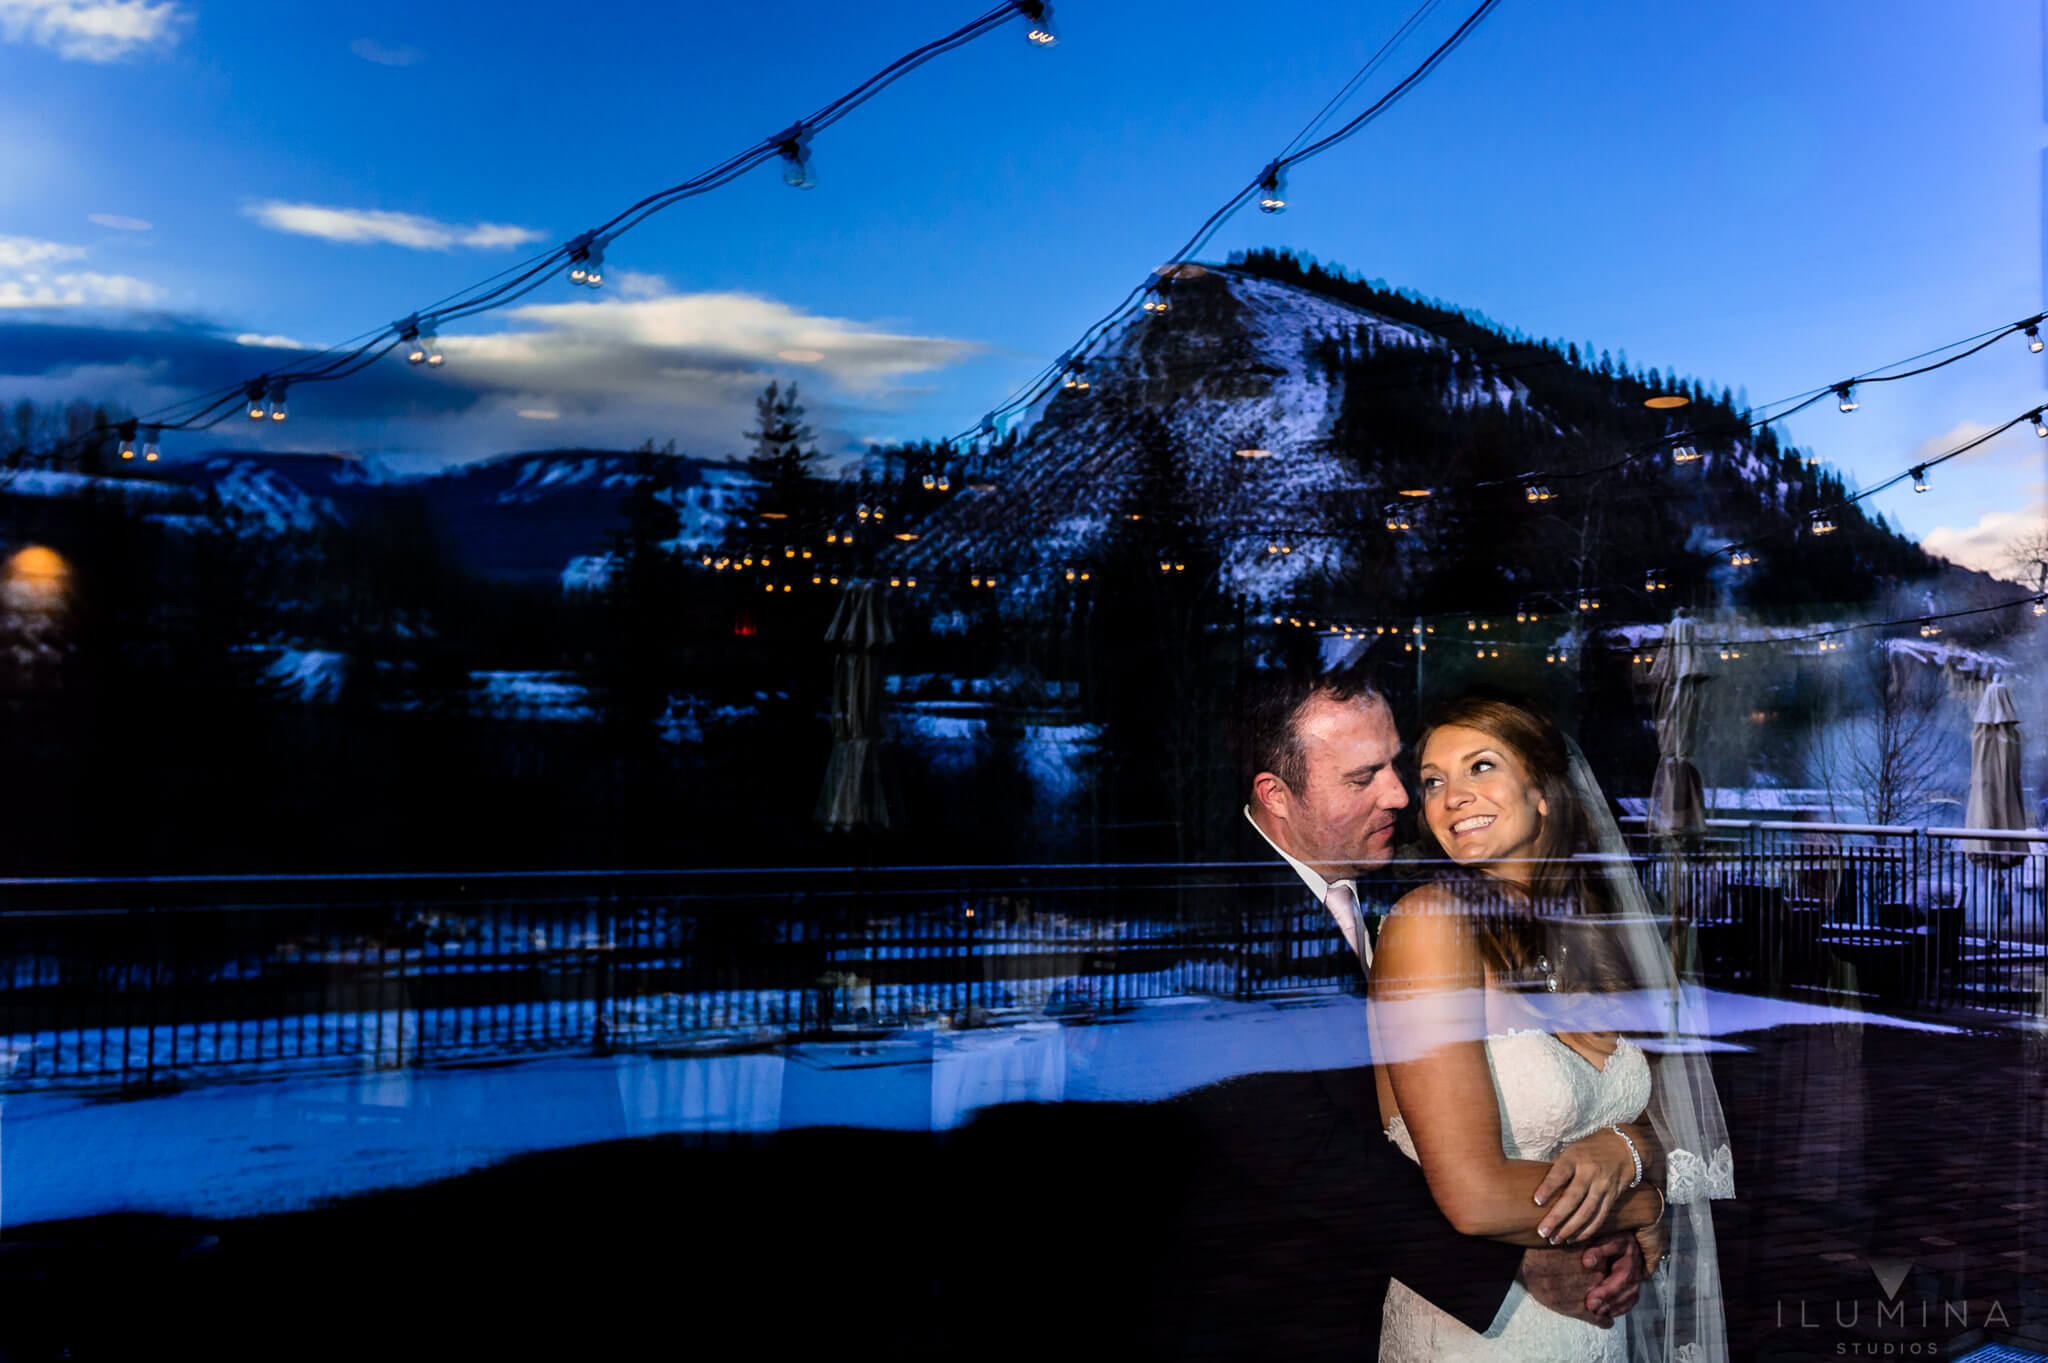 Double exposure color photo of bride and groom embracing and smiling with mountains in background